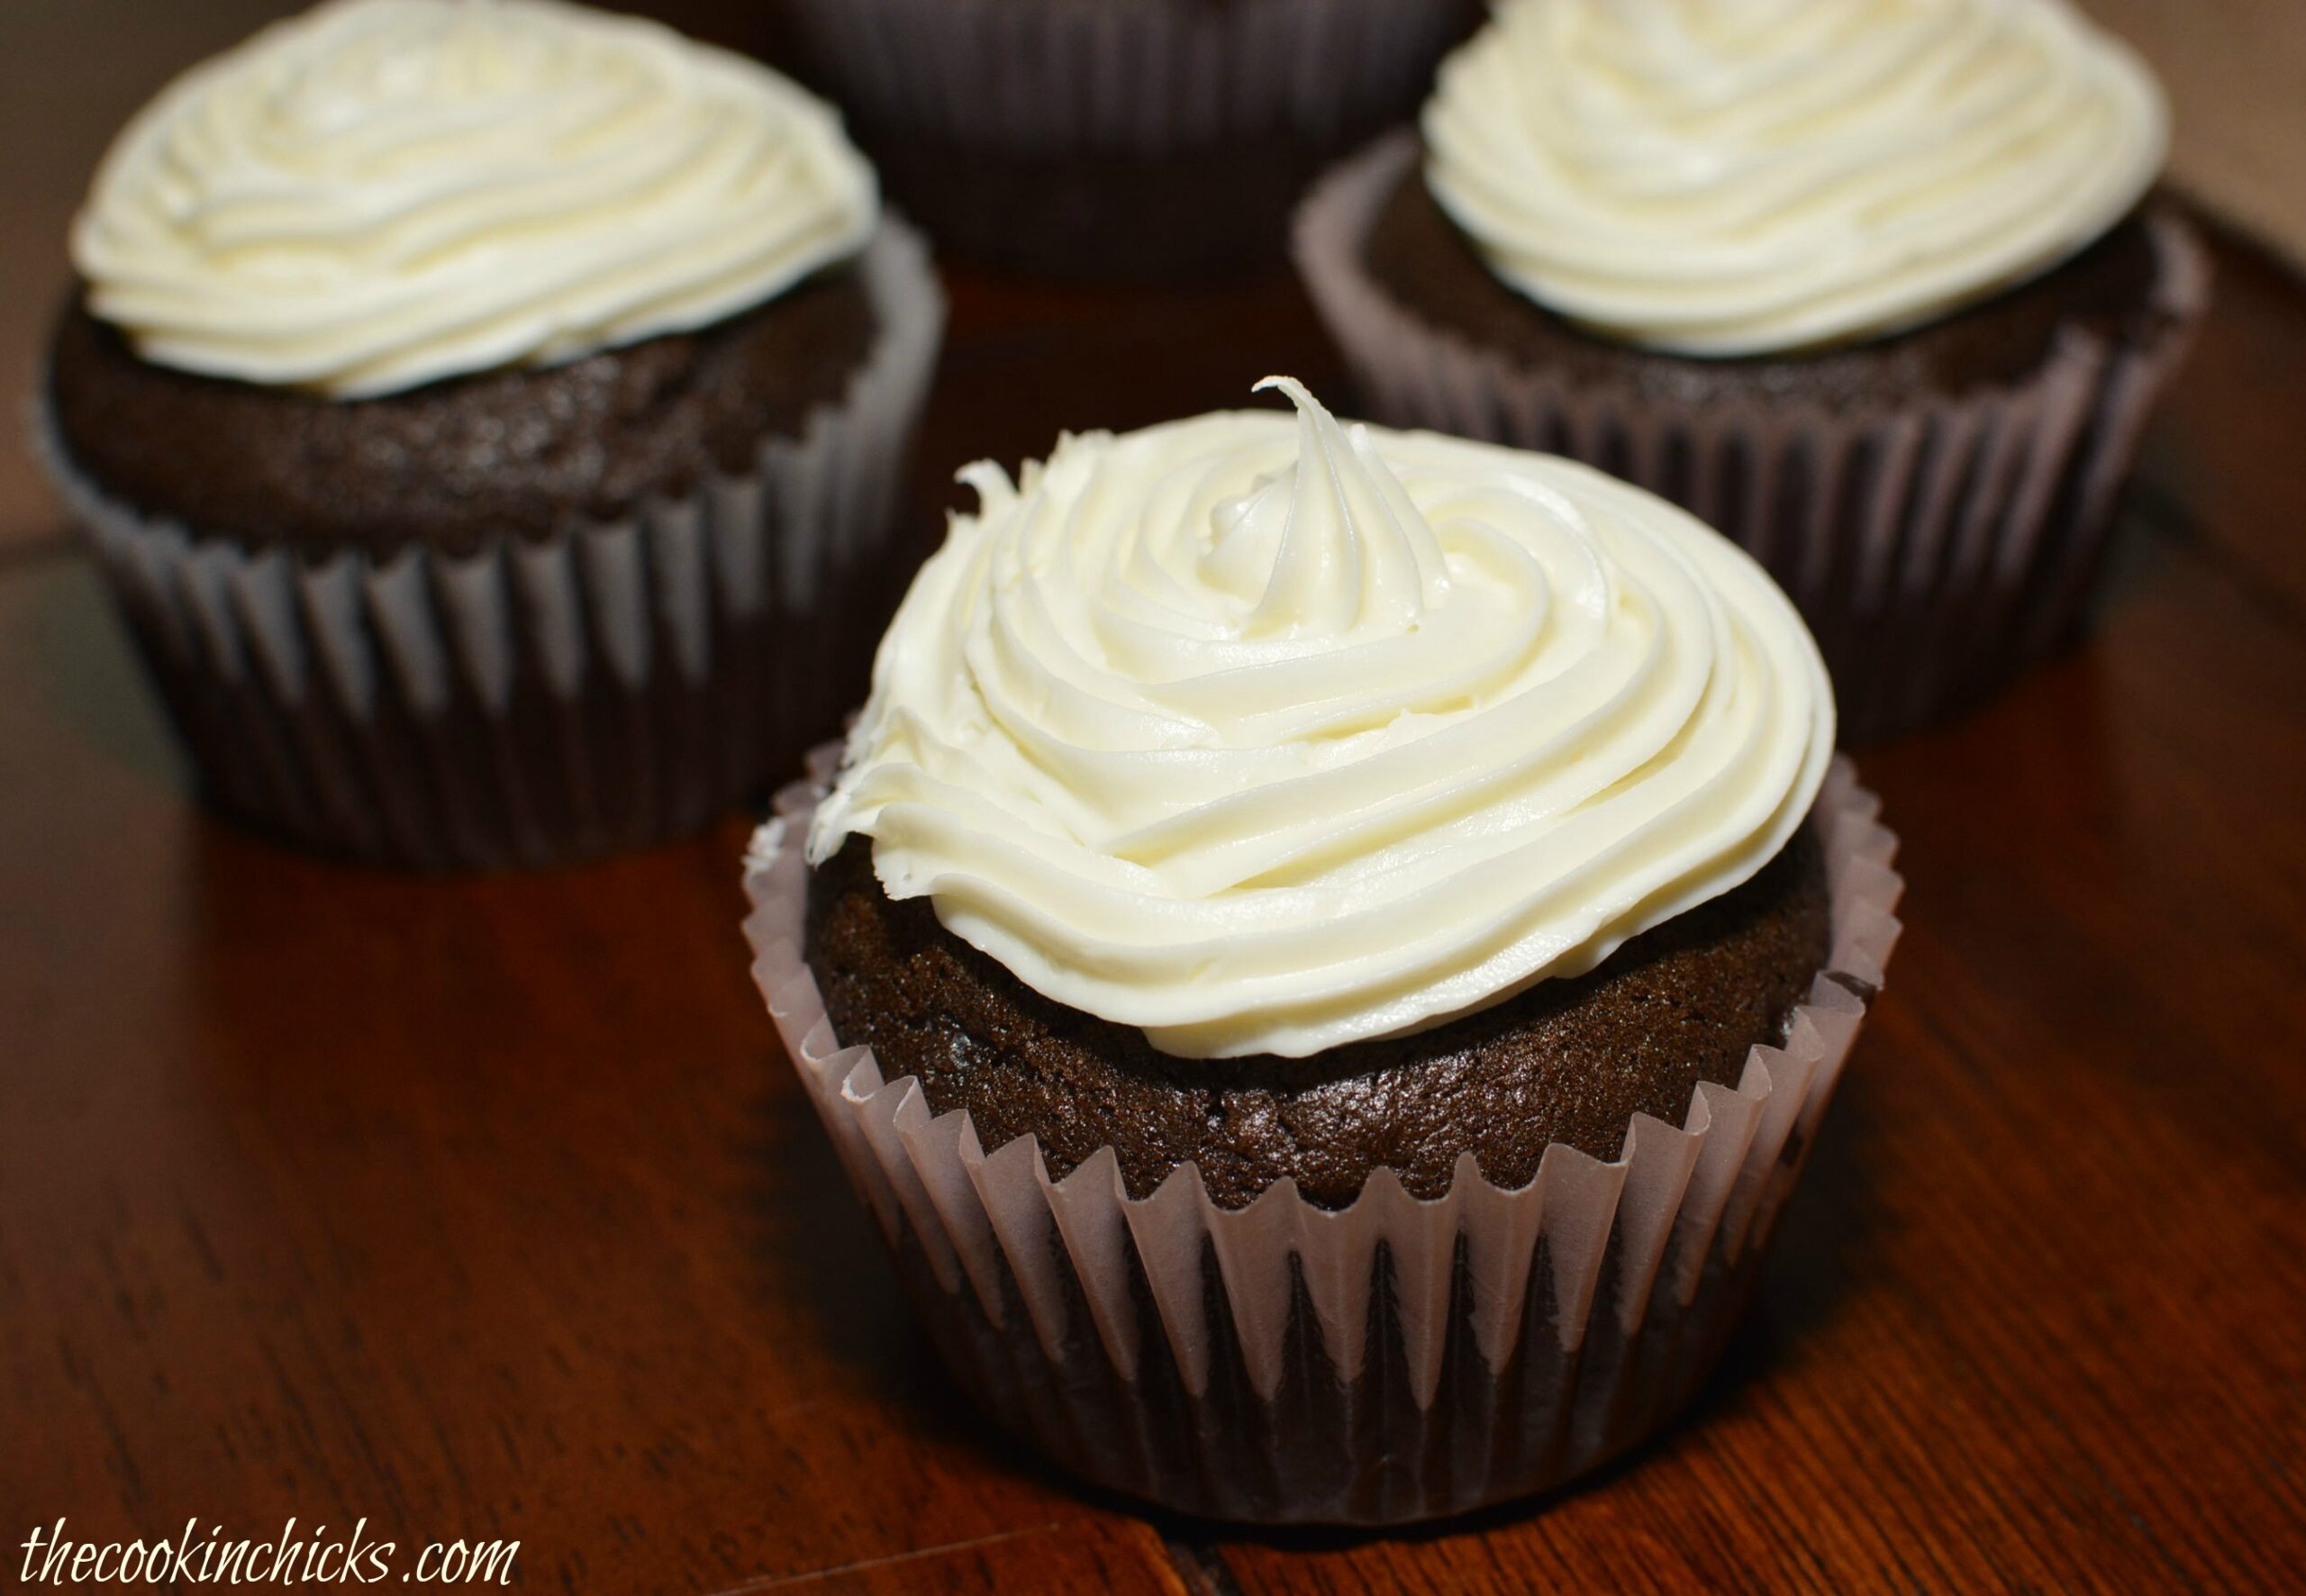 a chocolate mayonnaise cupcake with vanilla frosting.